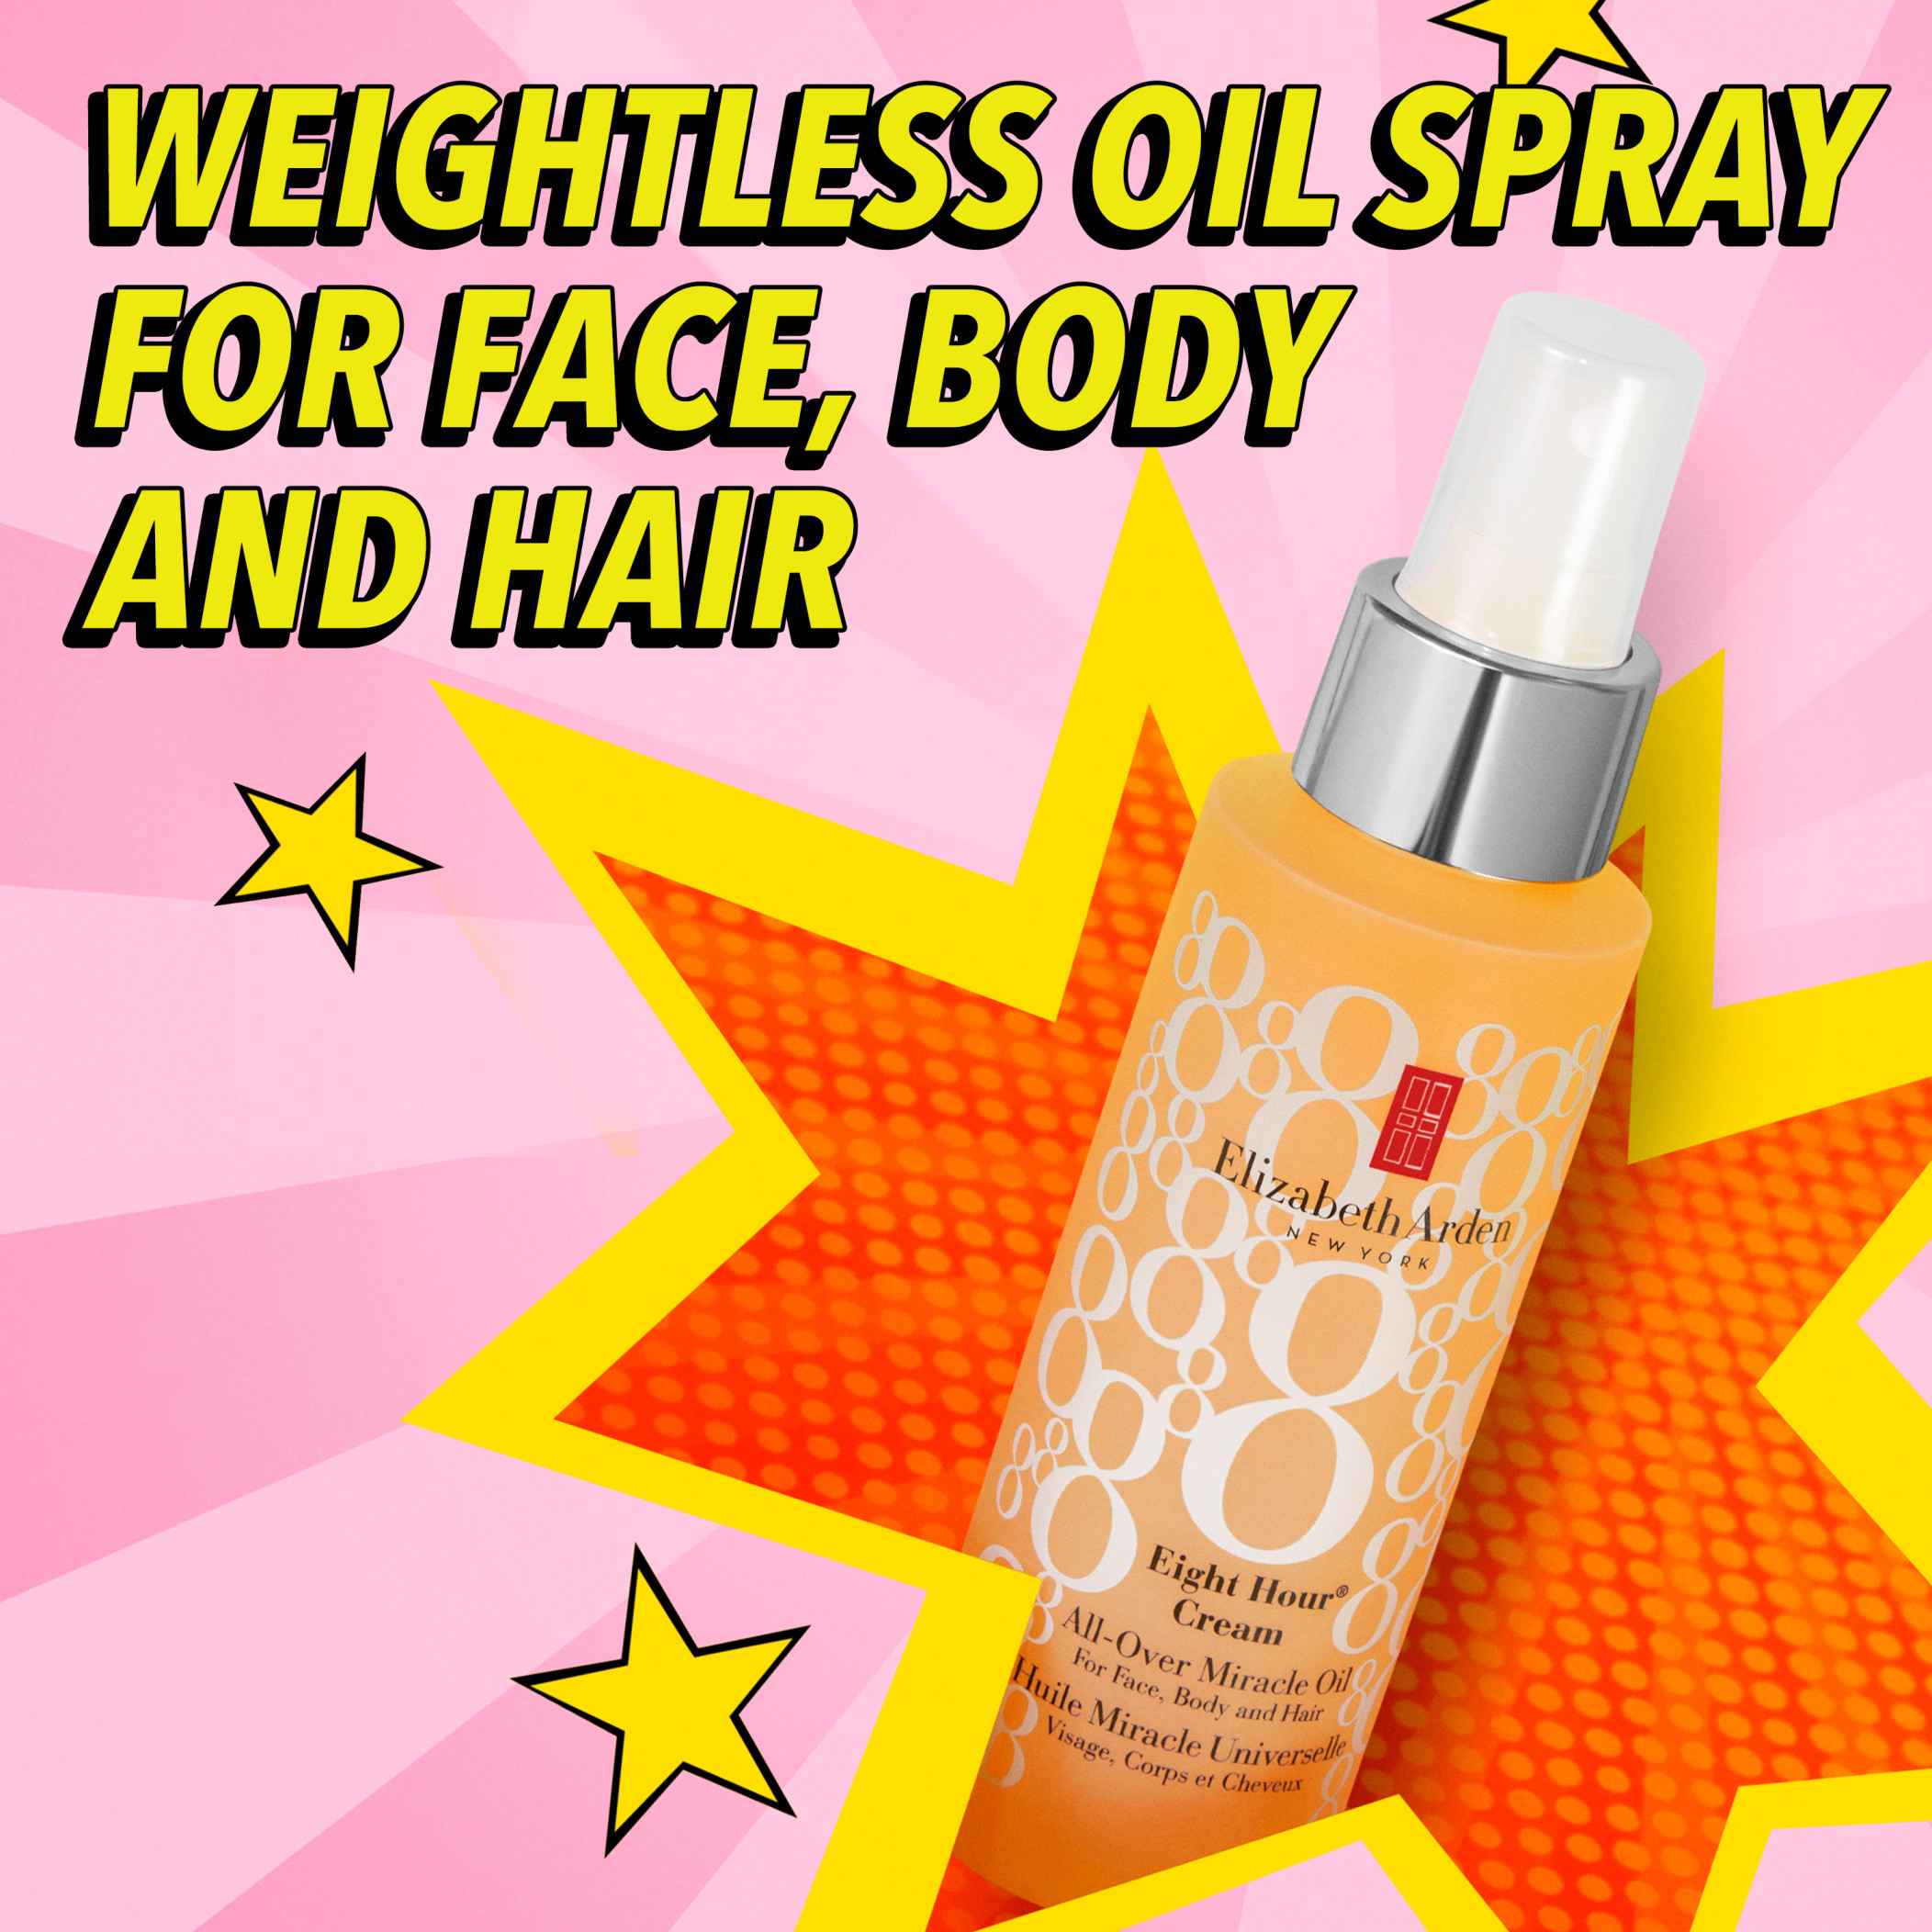 Weightless oil spray for face, body and hair